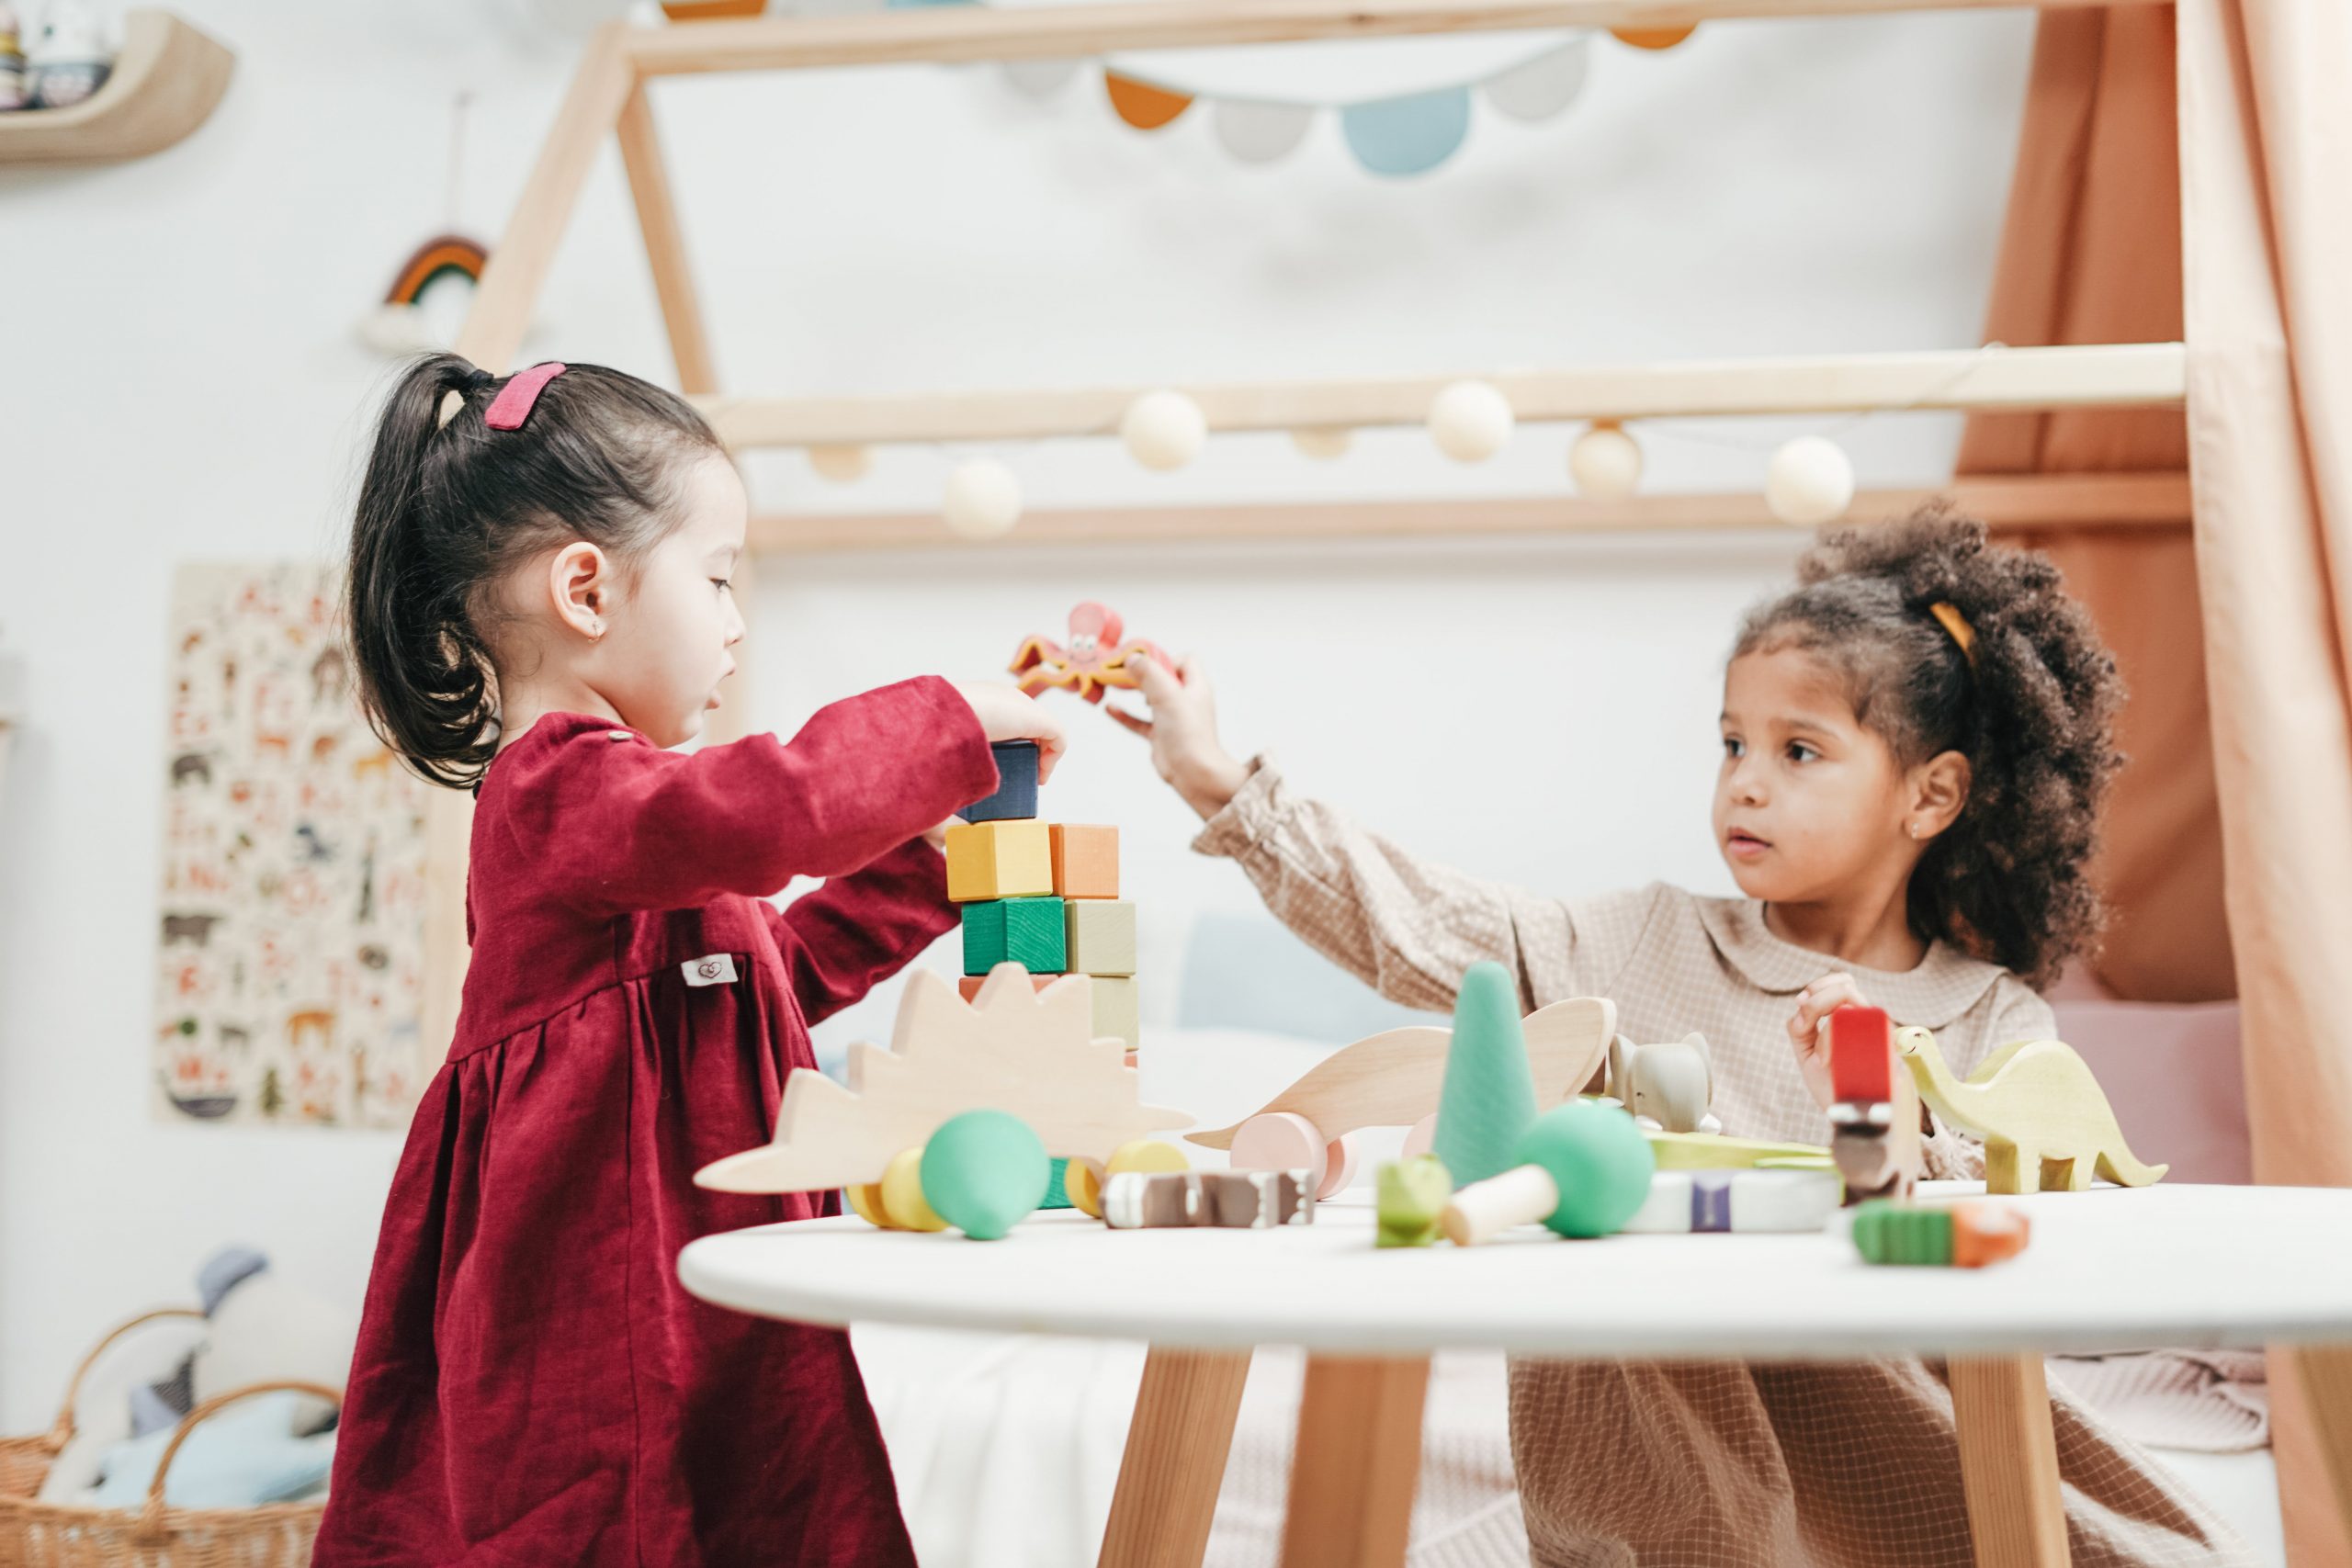 Two children playfully interact with colorful blocks and toys on a table in a playroom.